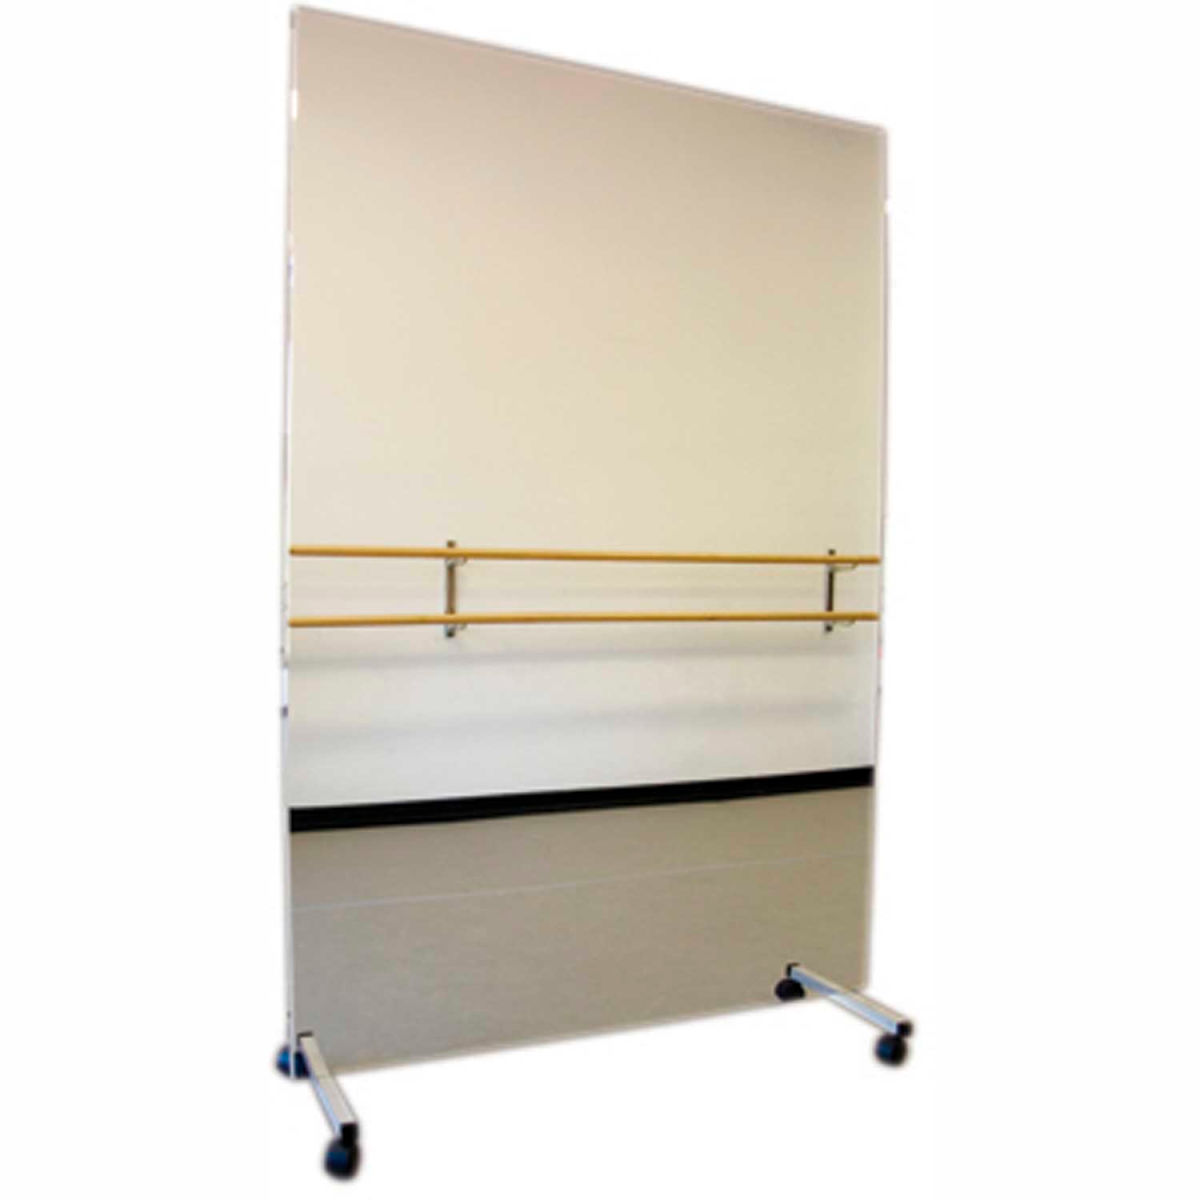 Picture of Fabrication Enterprises B2140351 Vertical Ultra-Safe Glassless Mirror with Mobile Caster Base - 48 x 96 in.